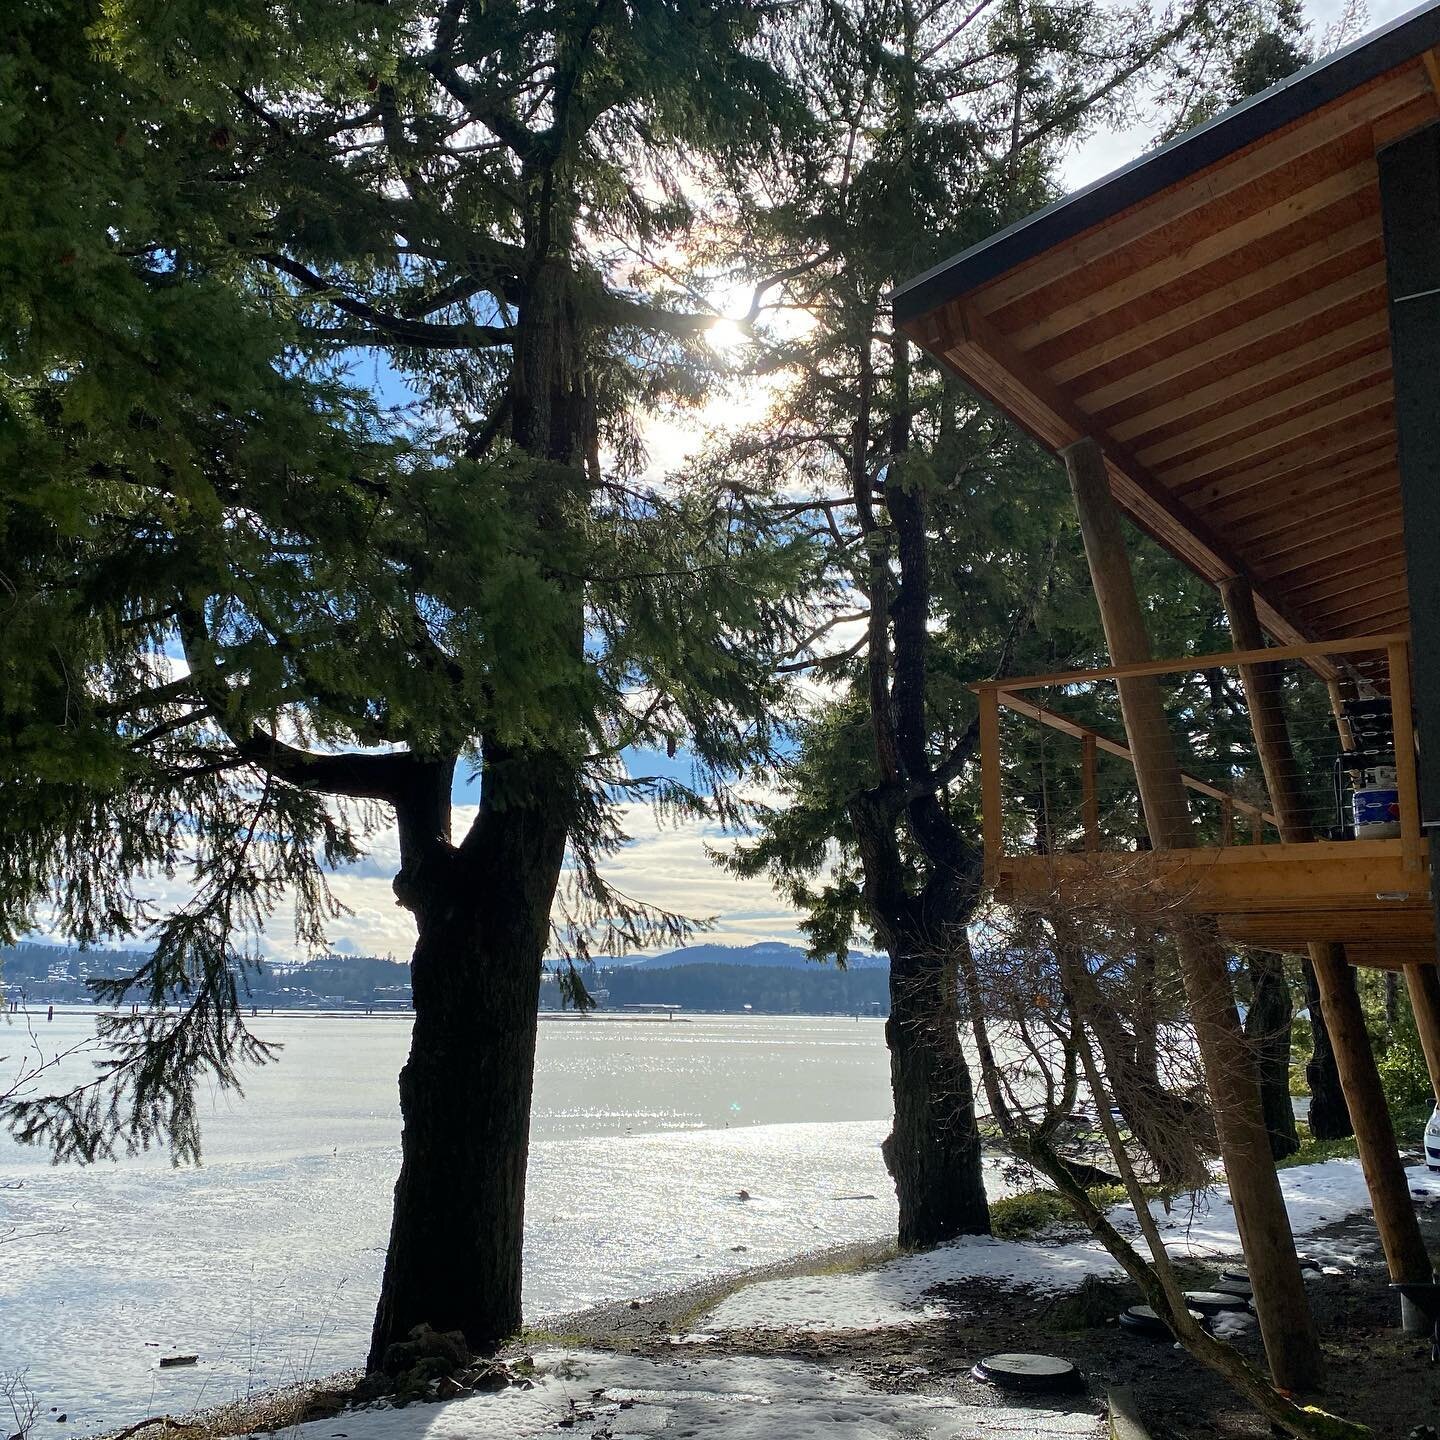 A winter morning filled with sunshine. #Resiliency #DesigningForResiliency #AWinterMorning #ArchitecturalDesign #Architecture #PassiveHouse #LivingBuildingChallenge #DocumentaryFilmmaking #SeeTheDocumentary @arcasmedia  #house .  https://vimeo.com/48